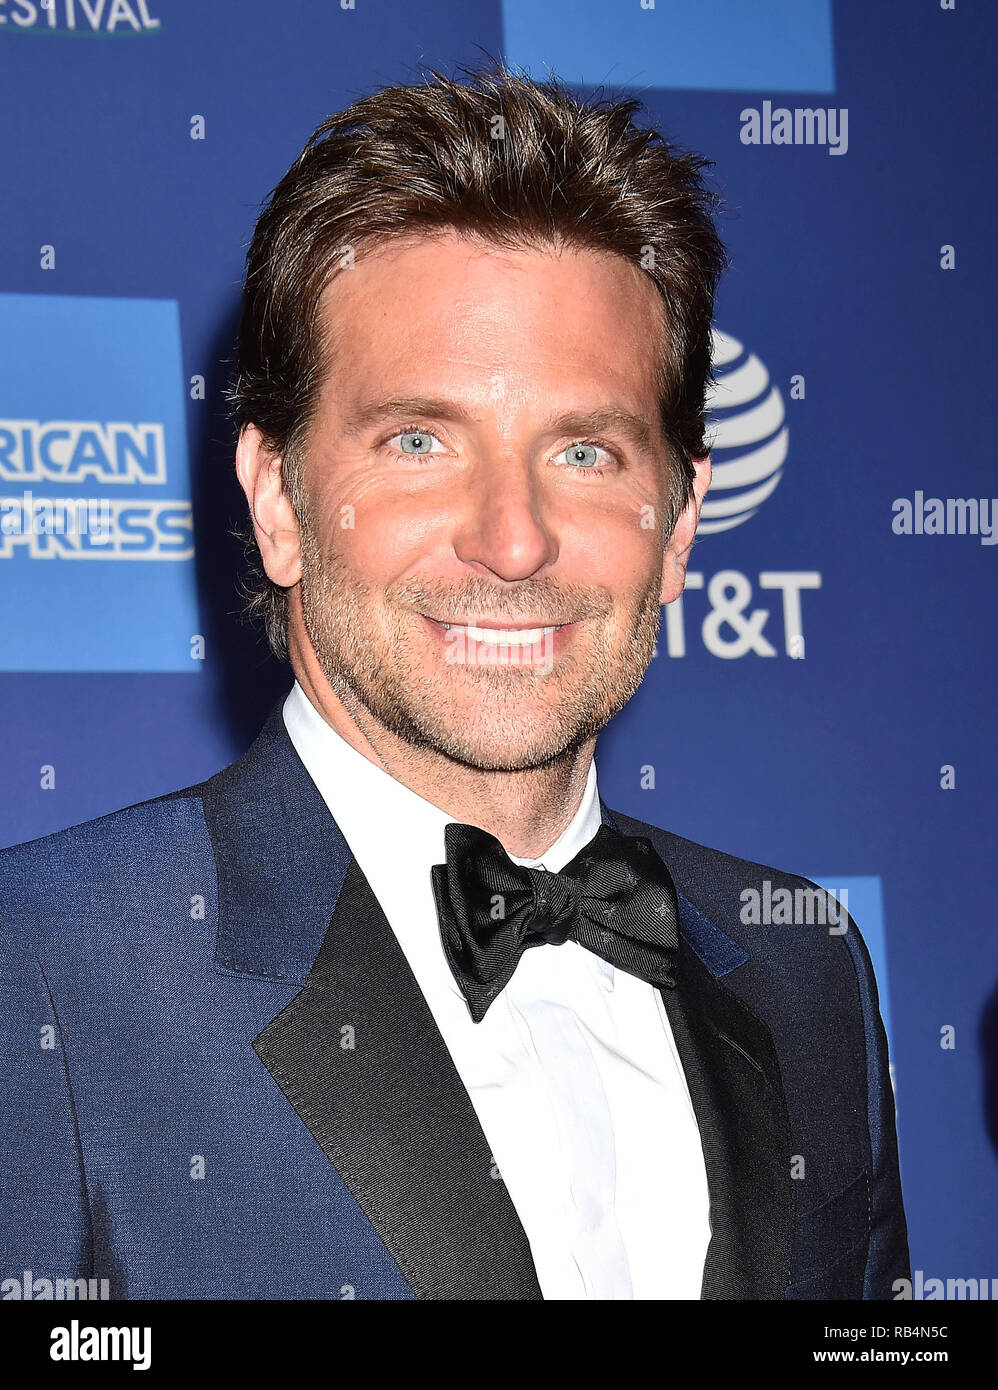 BRADLEY COOPER American film actor at the 30th Annual Palm Springs International Film Festival Film Awards Gala at Palm Springs Convention Center on January 3, 2019 in Palm Springs, California. Photo: Jeffrey Mayer Stock Photo